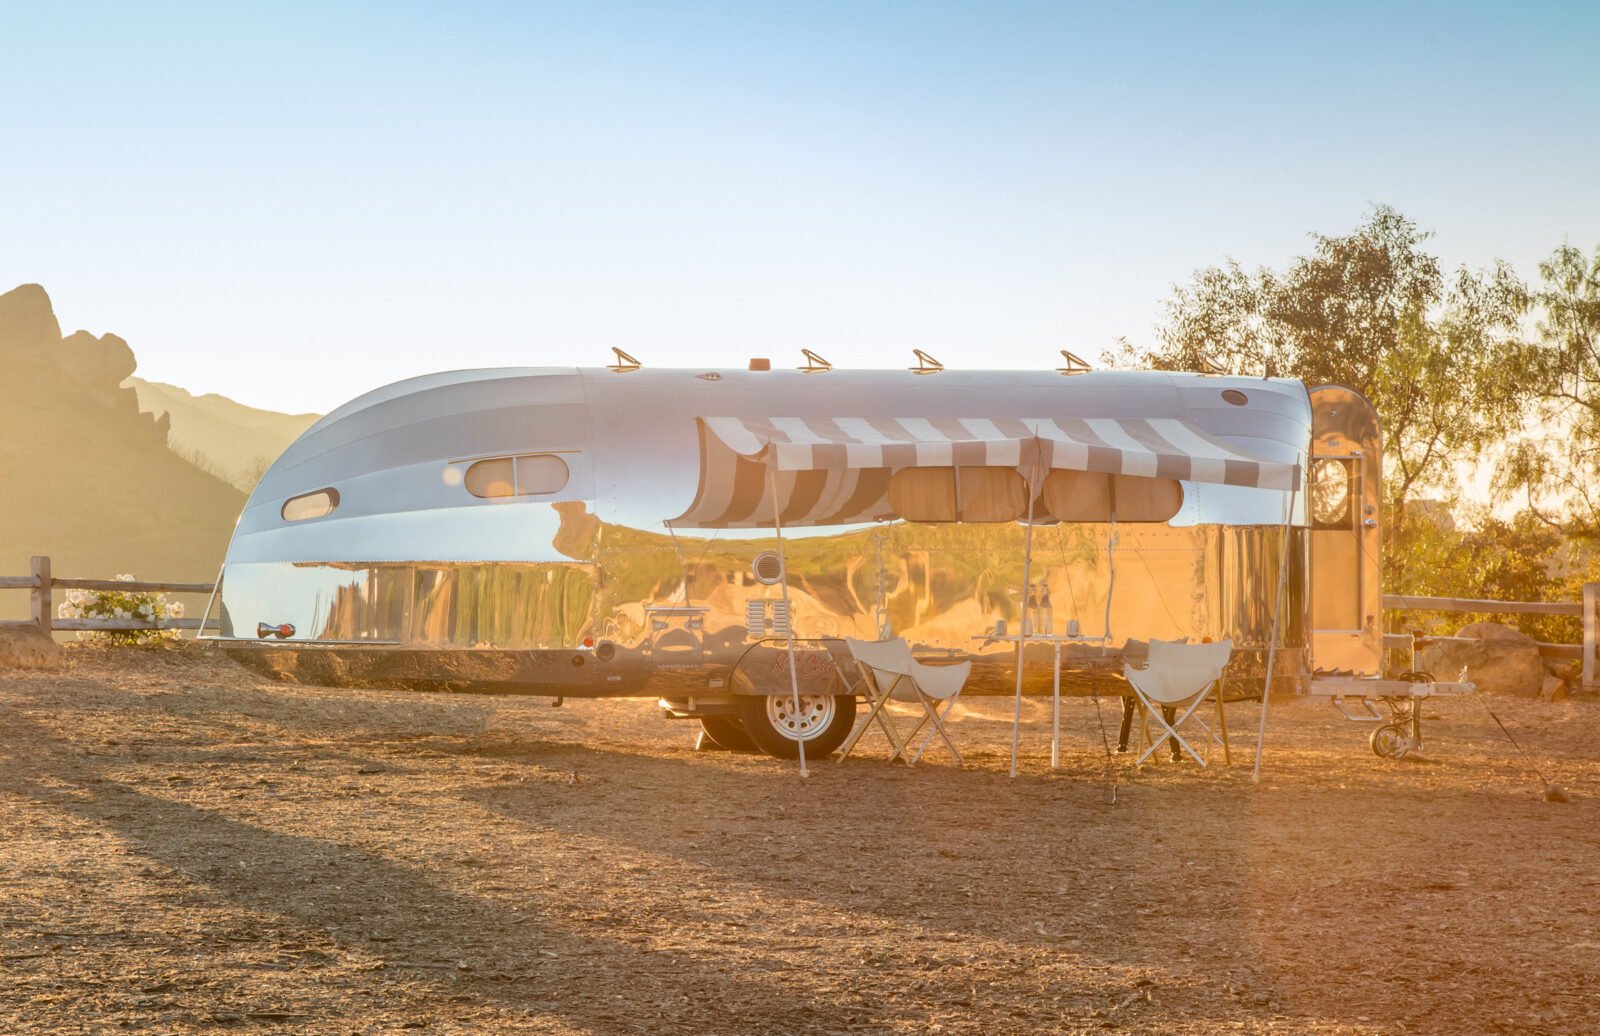 Bowlus Road Chief - The Endless Highways